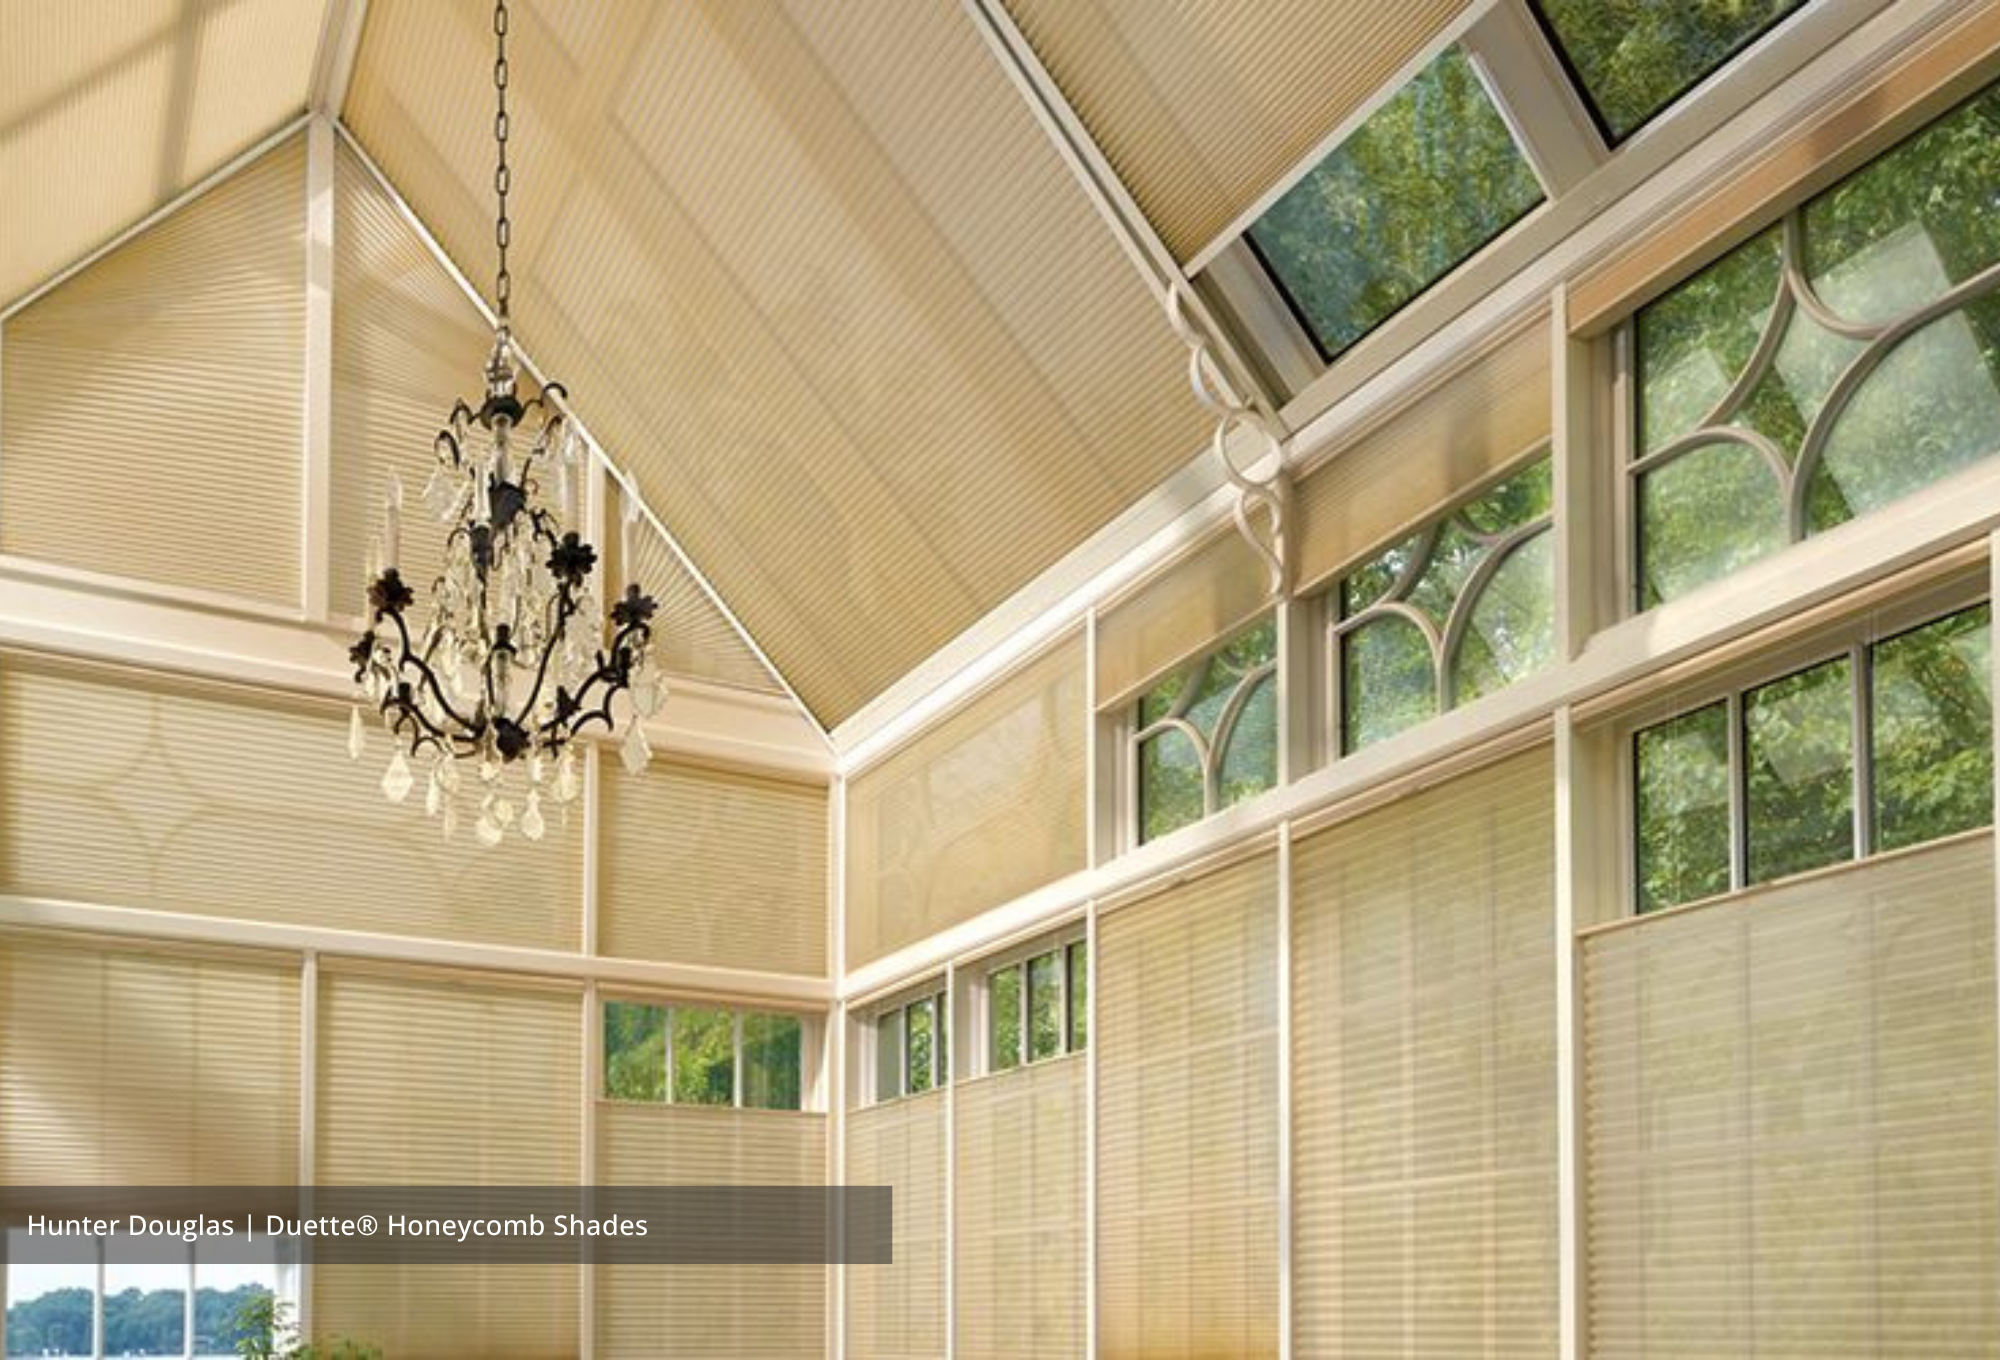 Hunter Douglas Duette® Honeycomb Shades available at JC Licht.